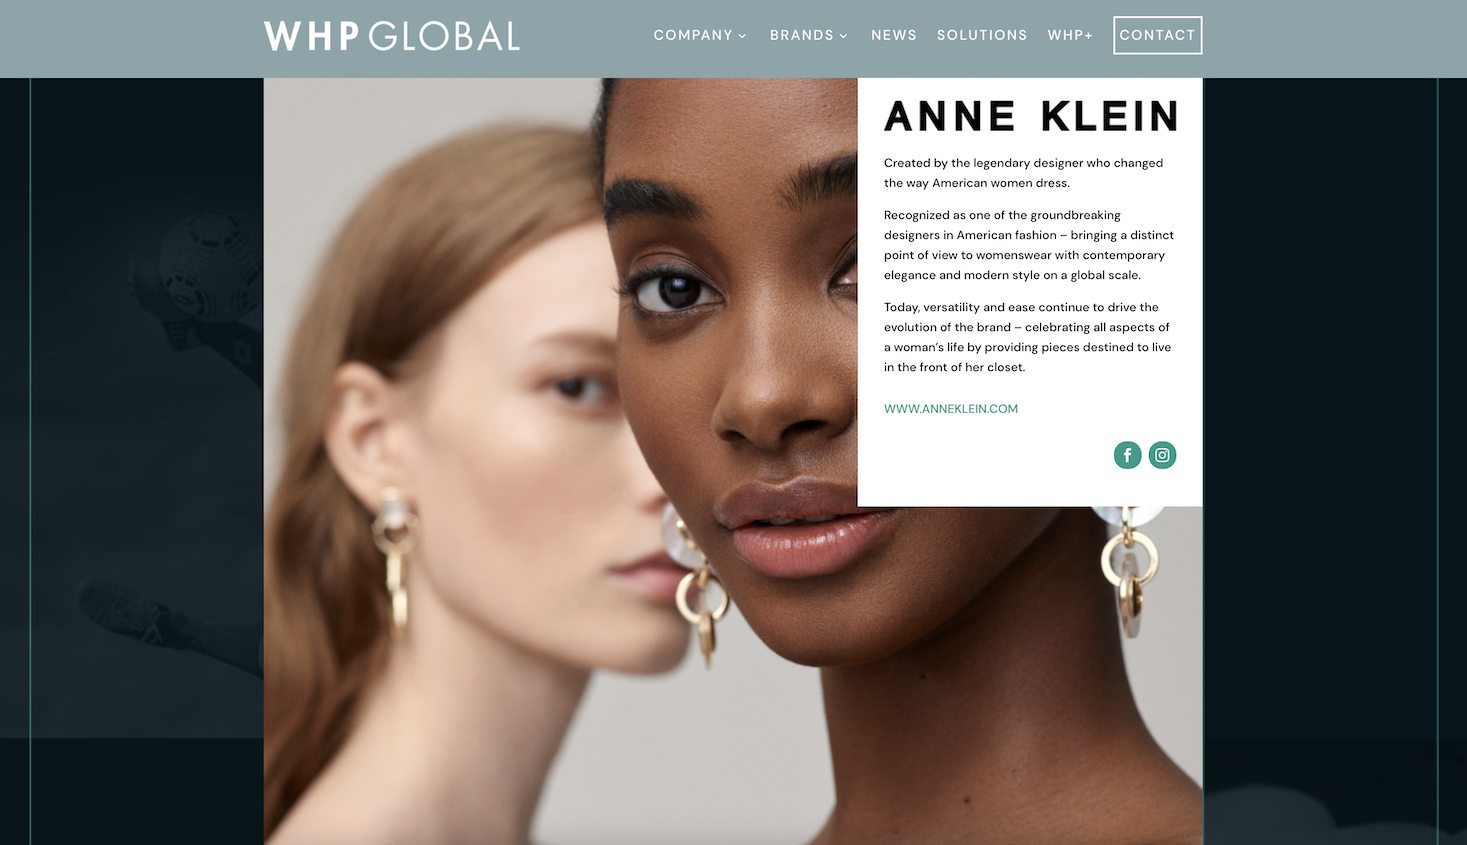 American Brand Management Company WHP Global Completes $375 Million Private Funding Round